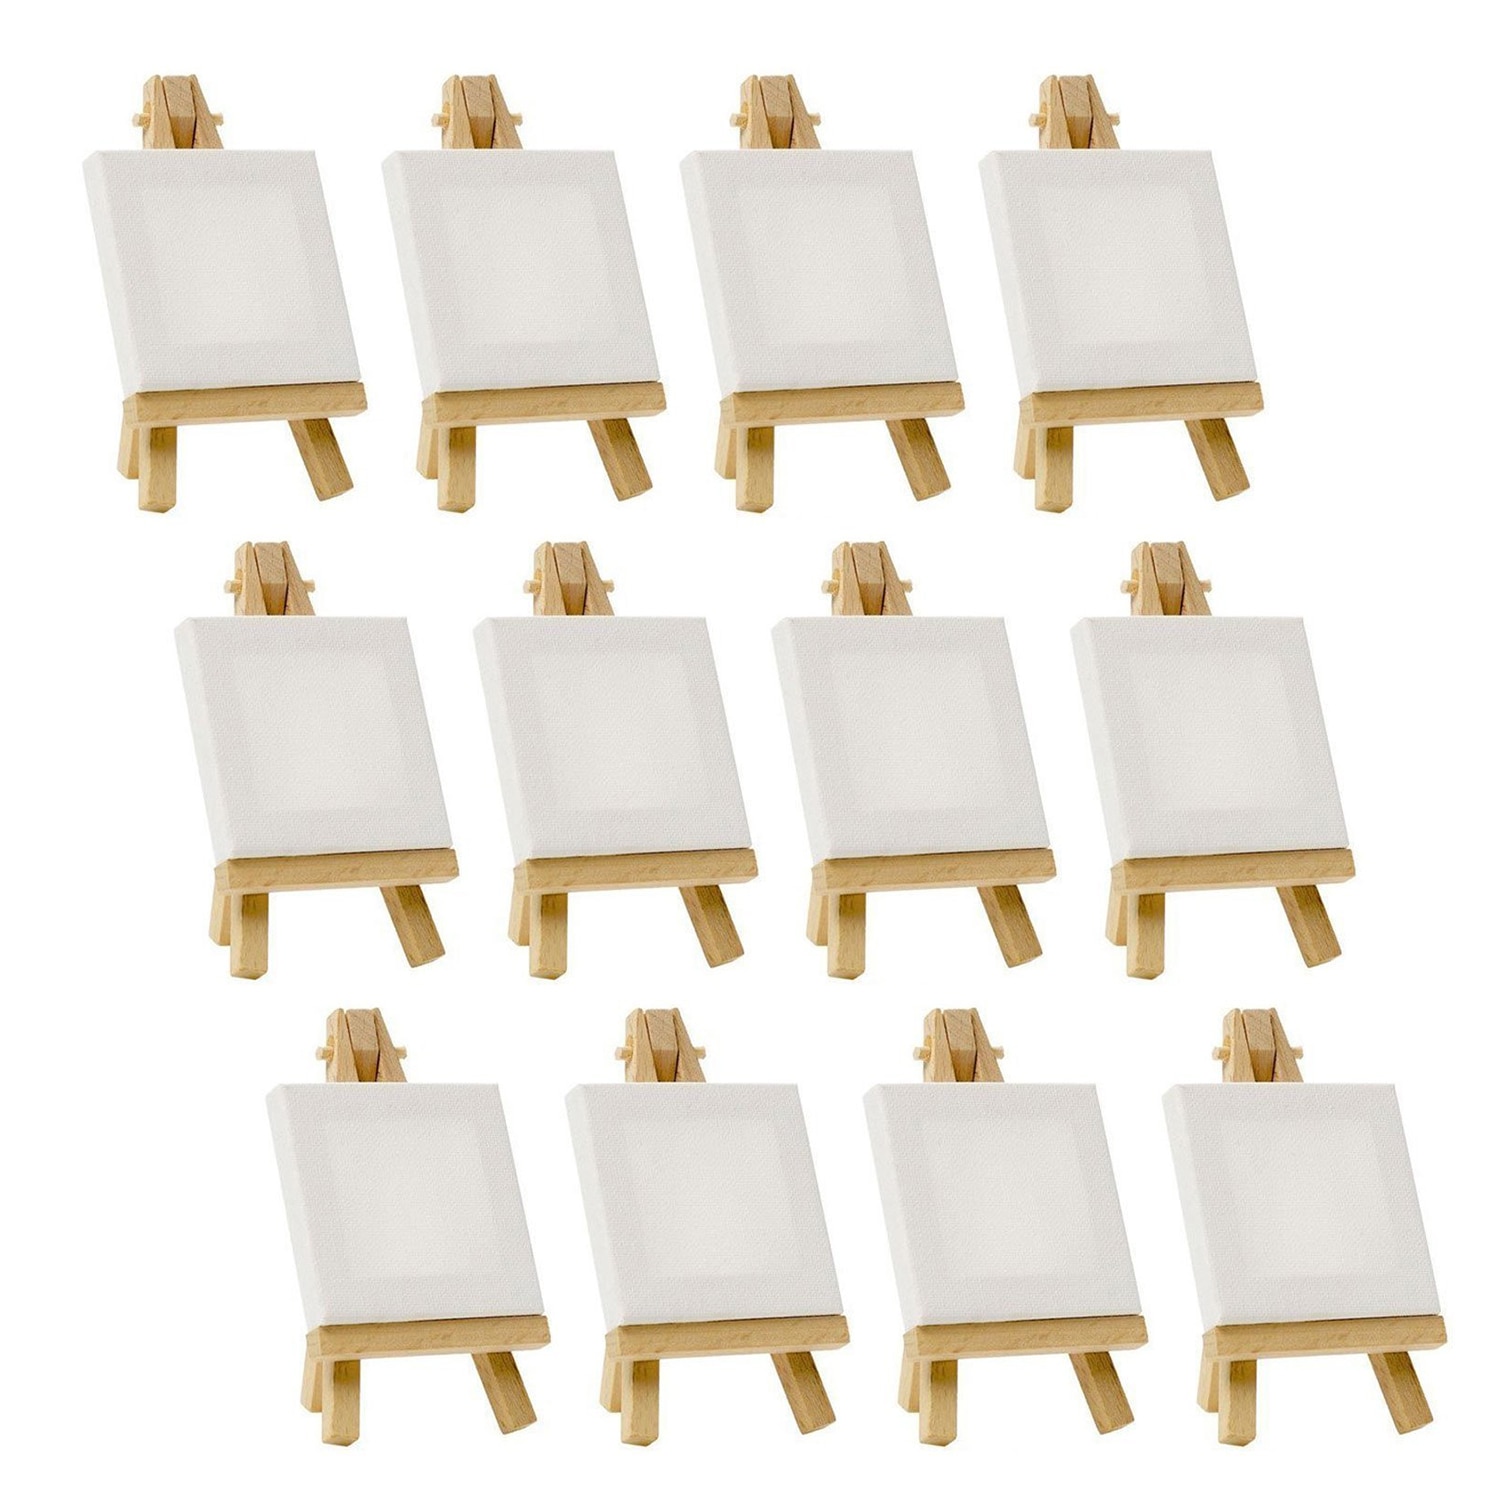 Artists 3 inch x3 inch Mini Canvas & 5 inch Mini Easel Set Painting Craft Drawing - Set Contains: 12 Mini Canvases & 12 Mini E